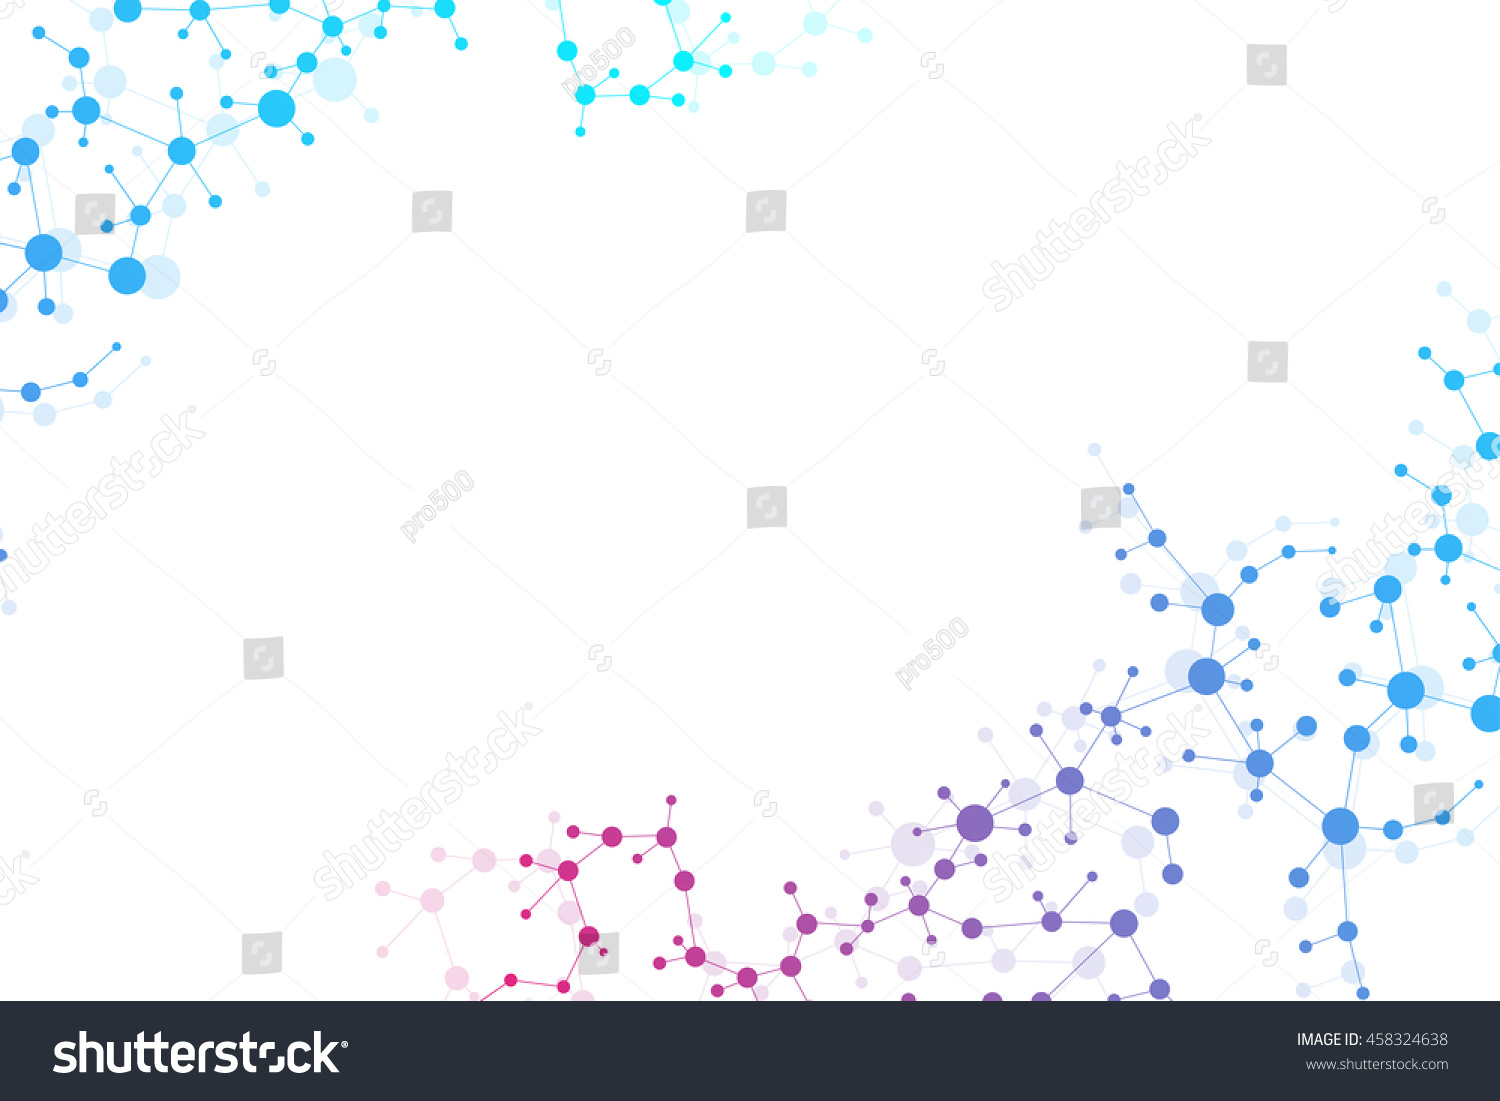 SVG of Structure molecule and communication Dna, atom, neurons. Science concept for your design. Connected lines with dots. Medical, technology, chemistry, science background. Vector illustration svg